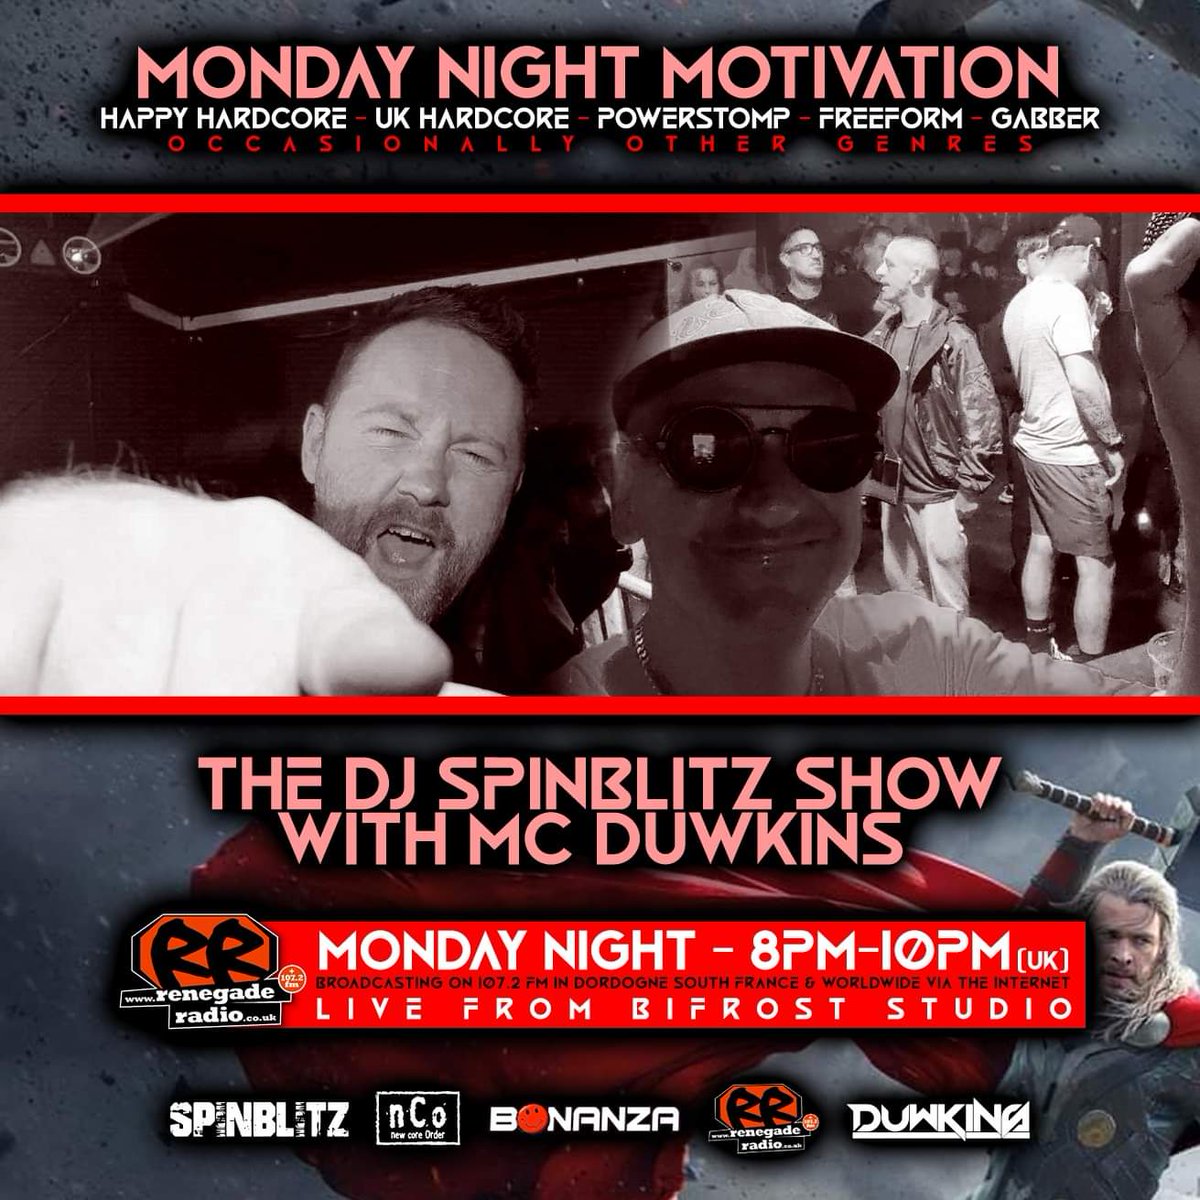 This evening 8pm till 10pm UK time on one of the greatest underground radio stations off all time @Renegade_Radio get us this evening in the link below 
renegaderadio.co.uk
#UKHardcore #Happyhardcore #Powerstomp #Freeform #Gabber @DJSpinblitz #MCduwkins